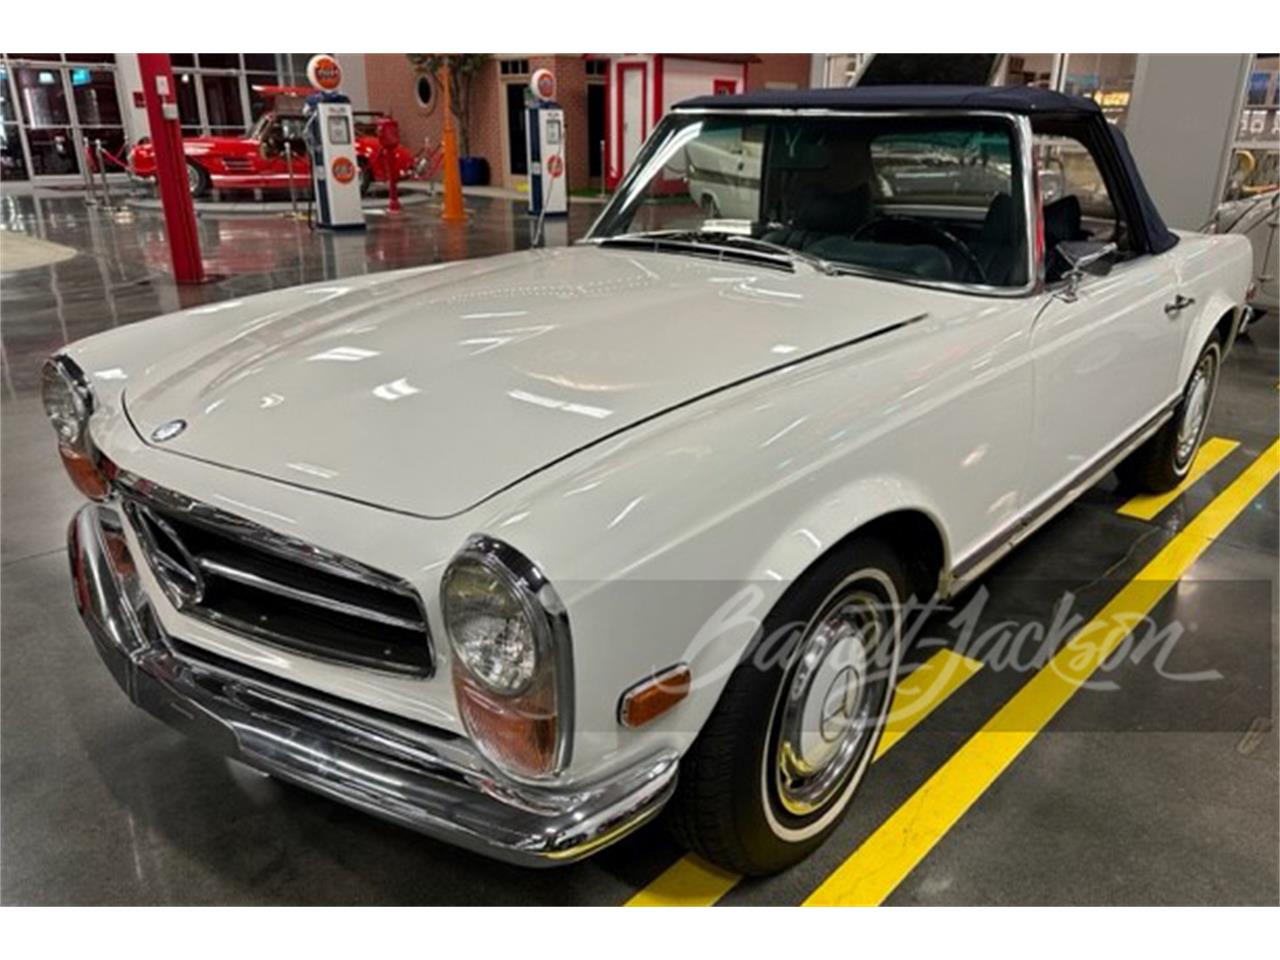 For Sale at Auction: 1971 Mercedes-Benz 280SL in Scottsdale, Arizona for sale in Scottsdale, AZ